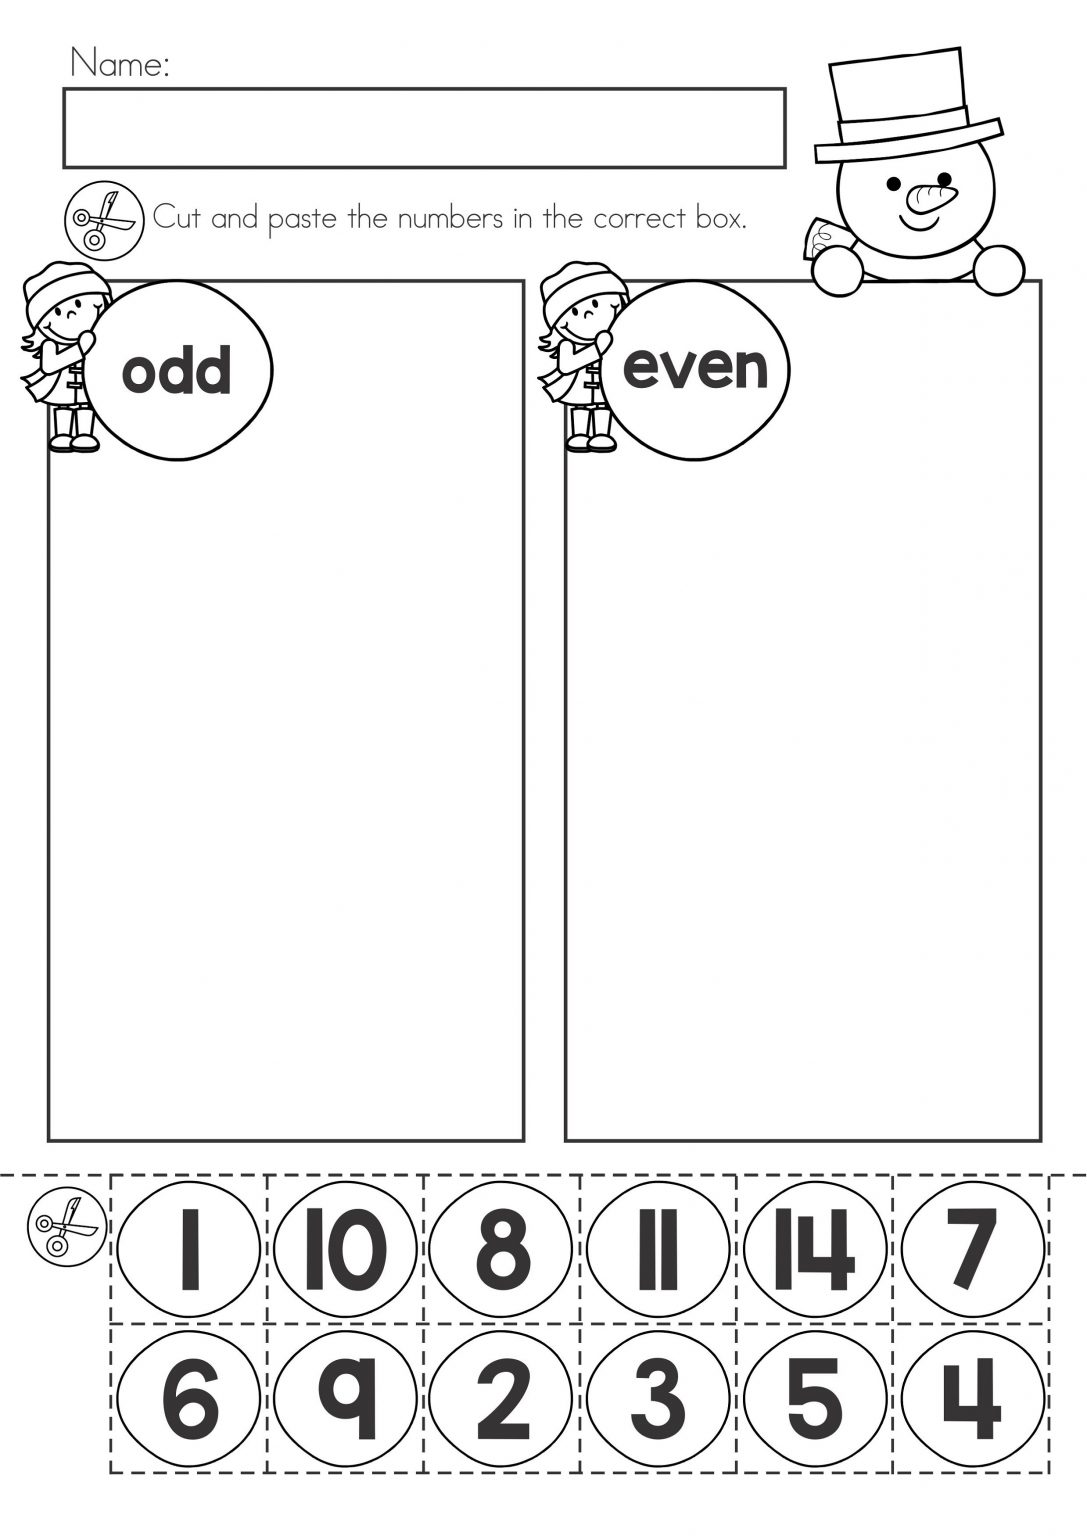 even-and-odd-number-worksheets-101-activity-odd-numbers-math-worksheet-for-2nd-grade